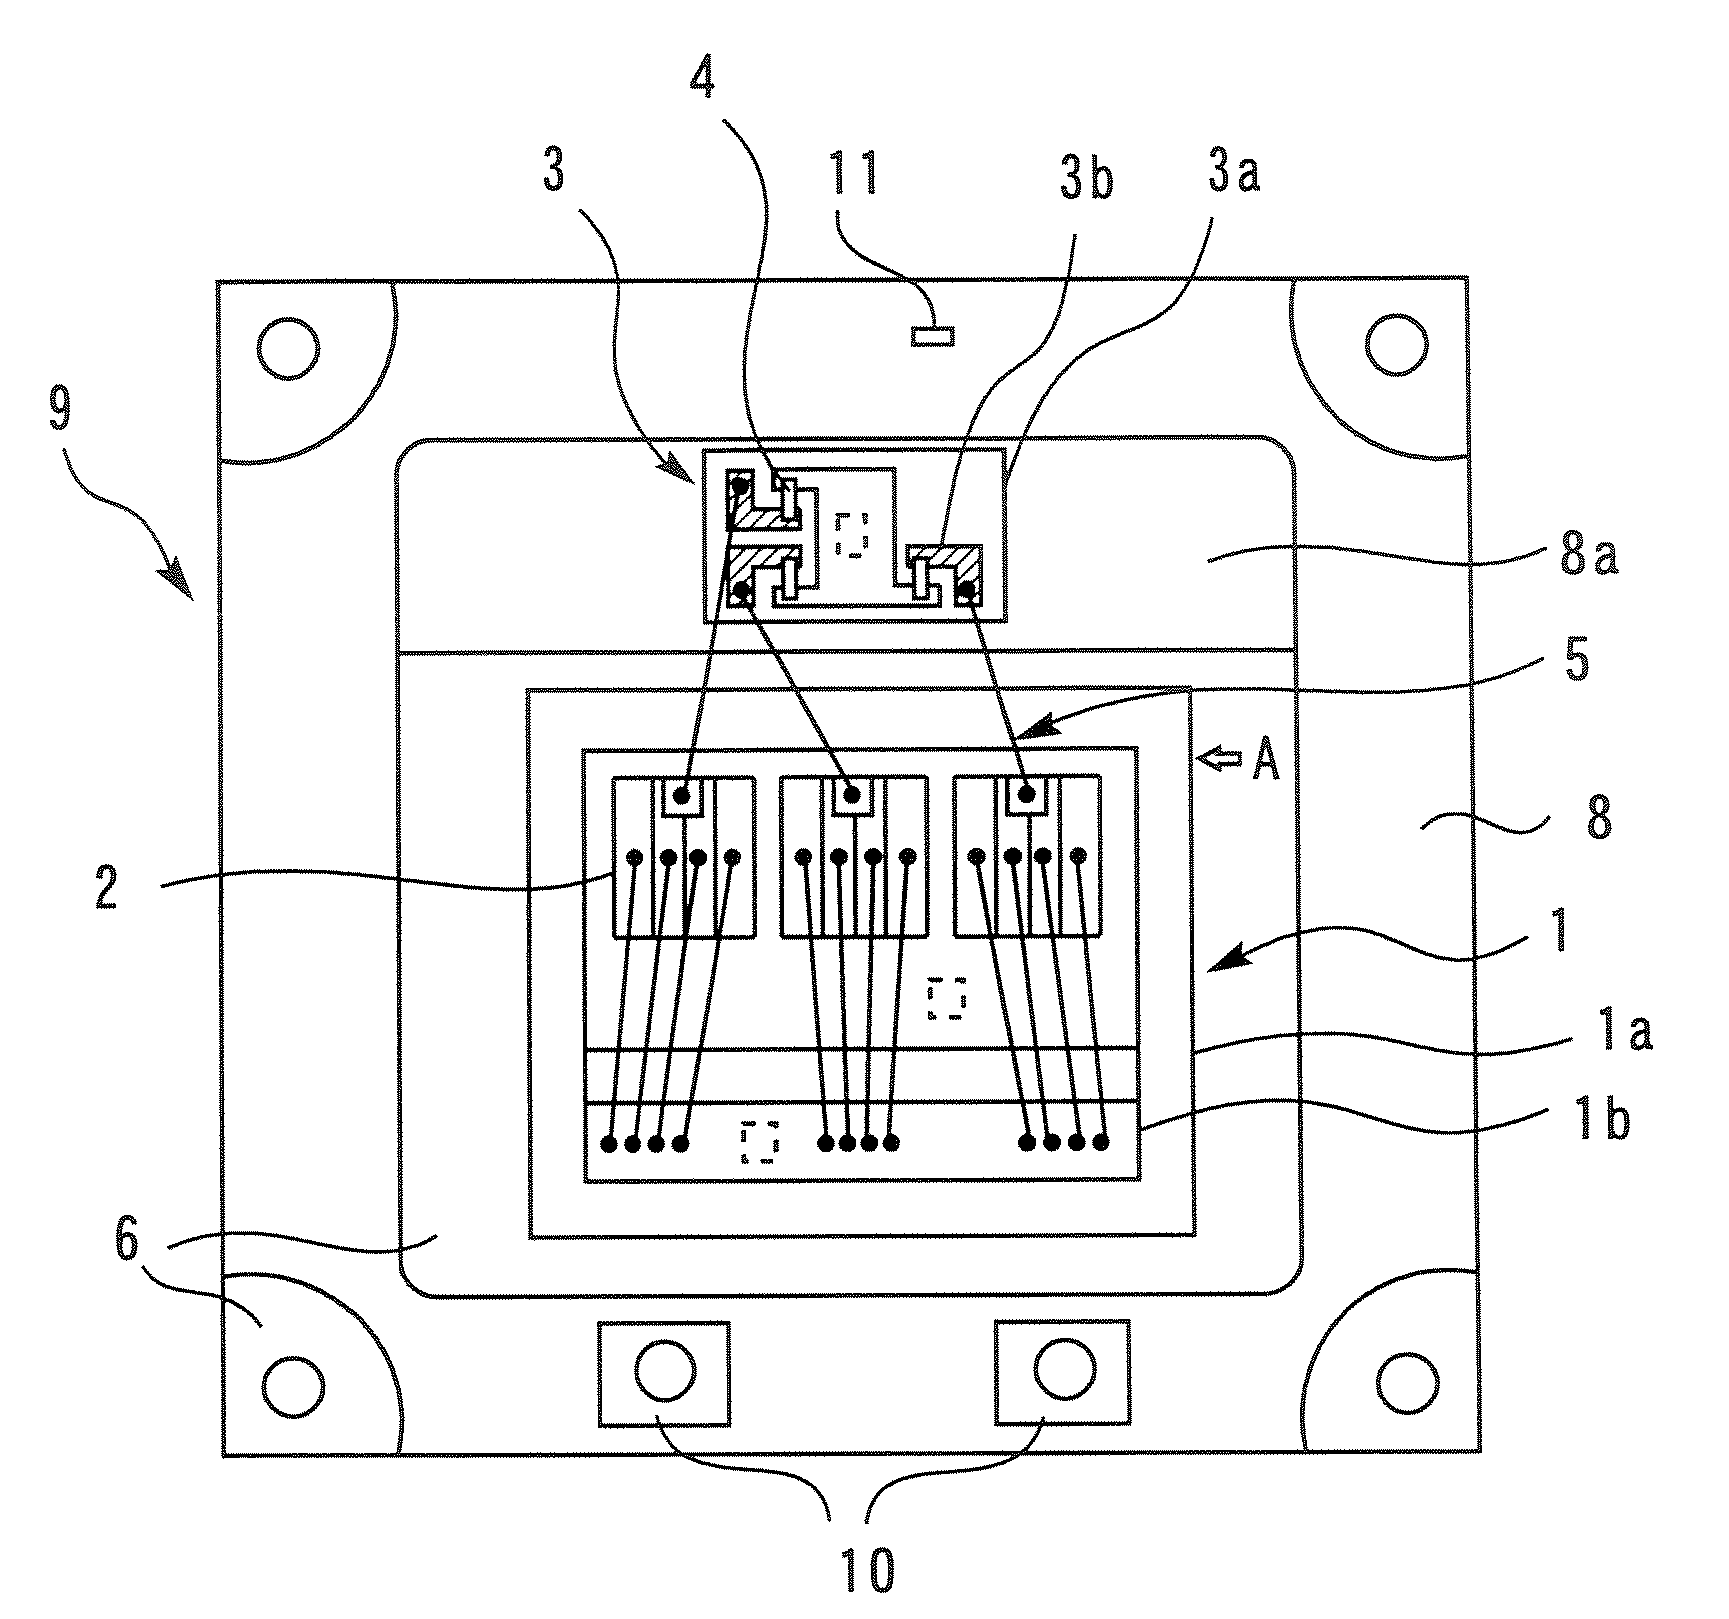 Semiconductor device having a resistance for equalizing the current distribution